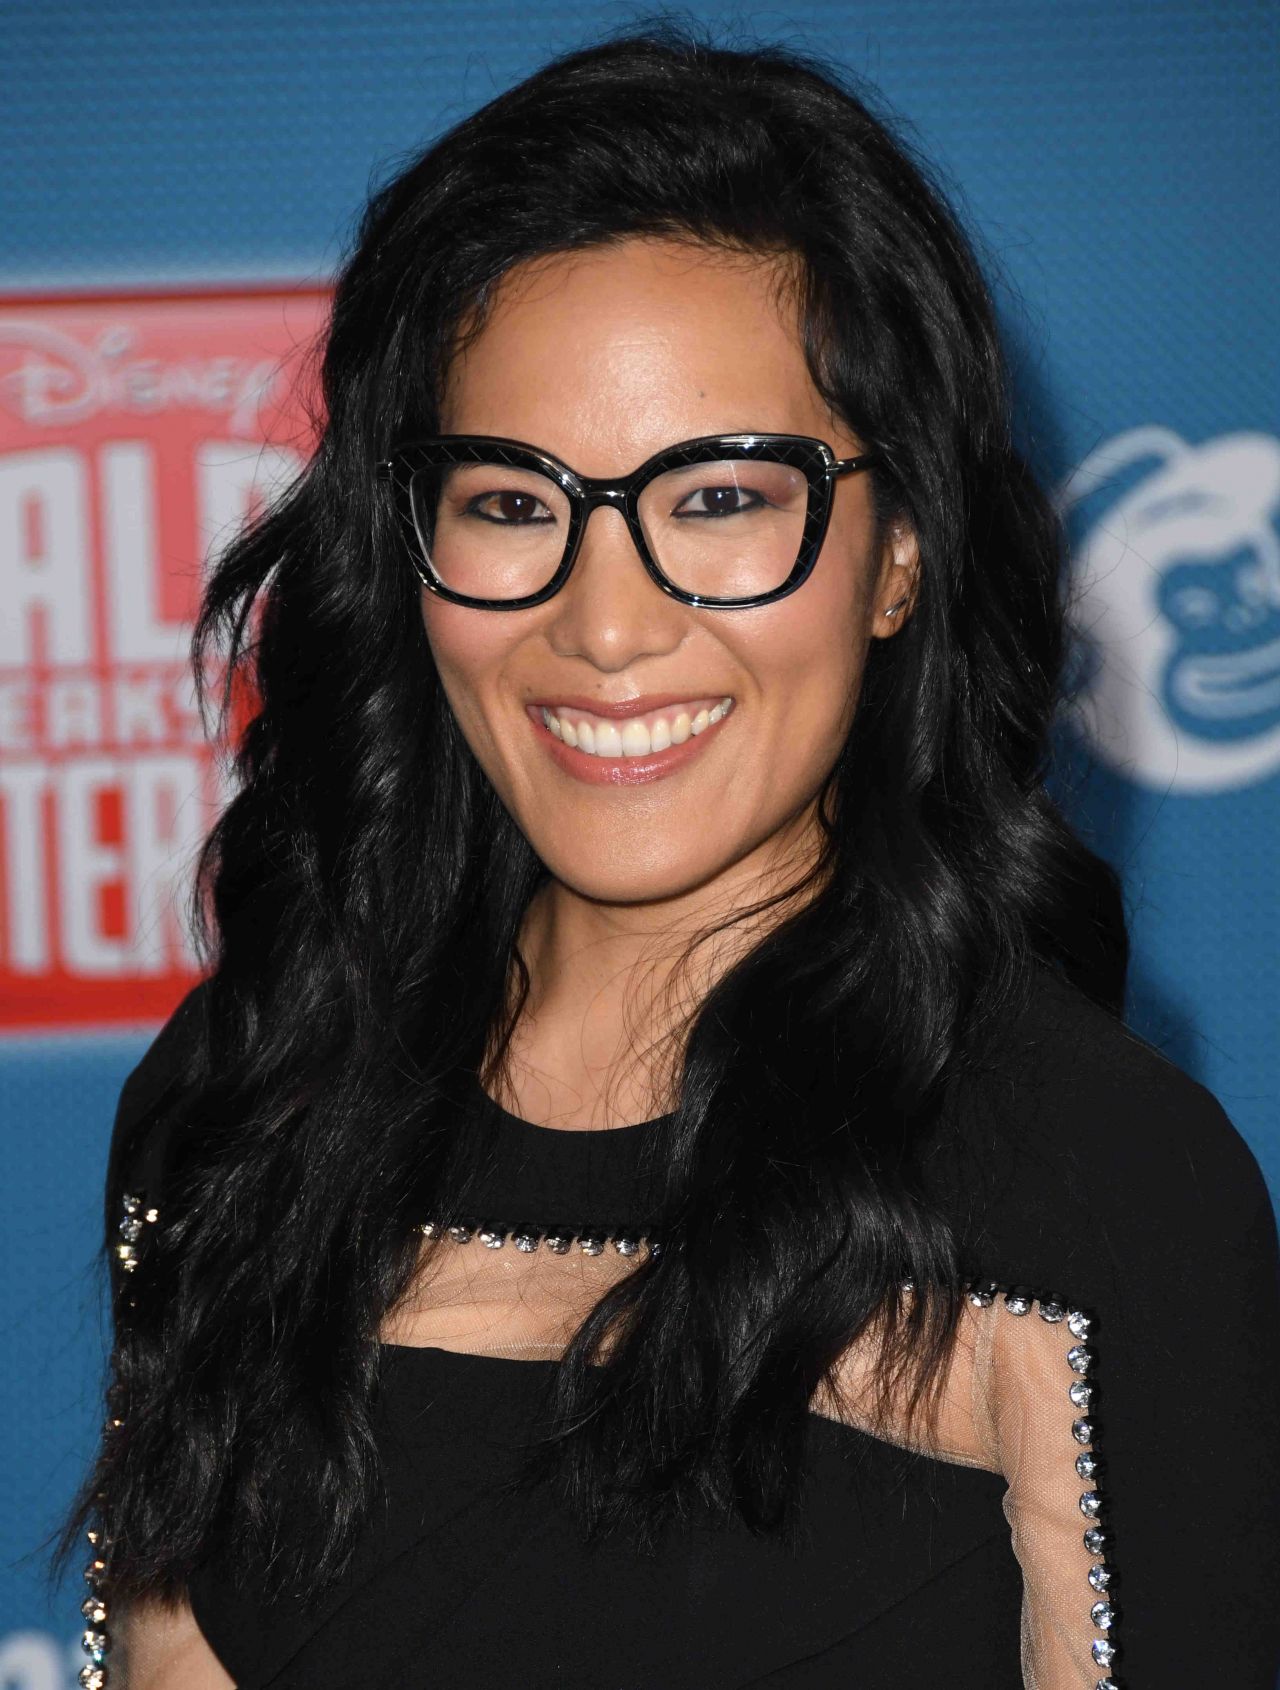 ALI WONG at Netflix FYSee Kick-off Event in Los Angeles 05 